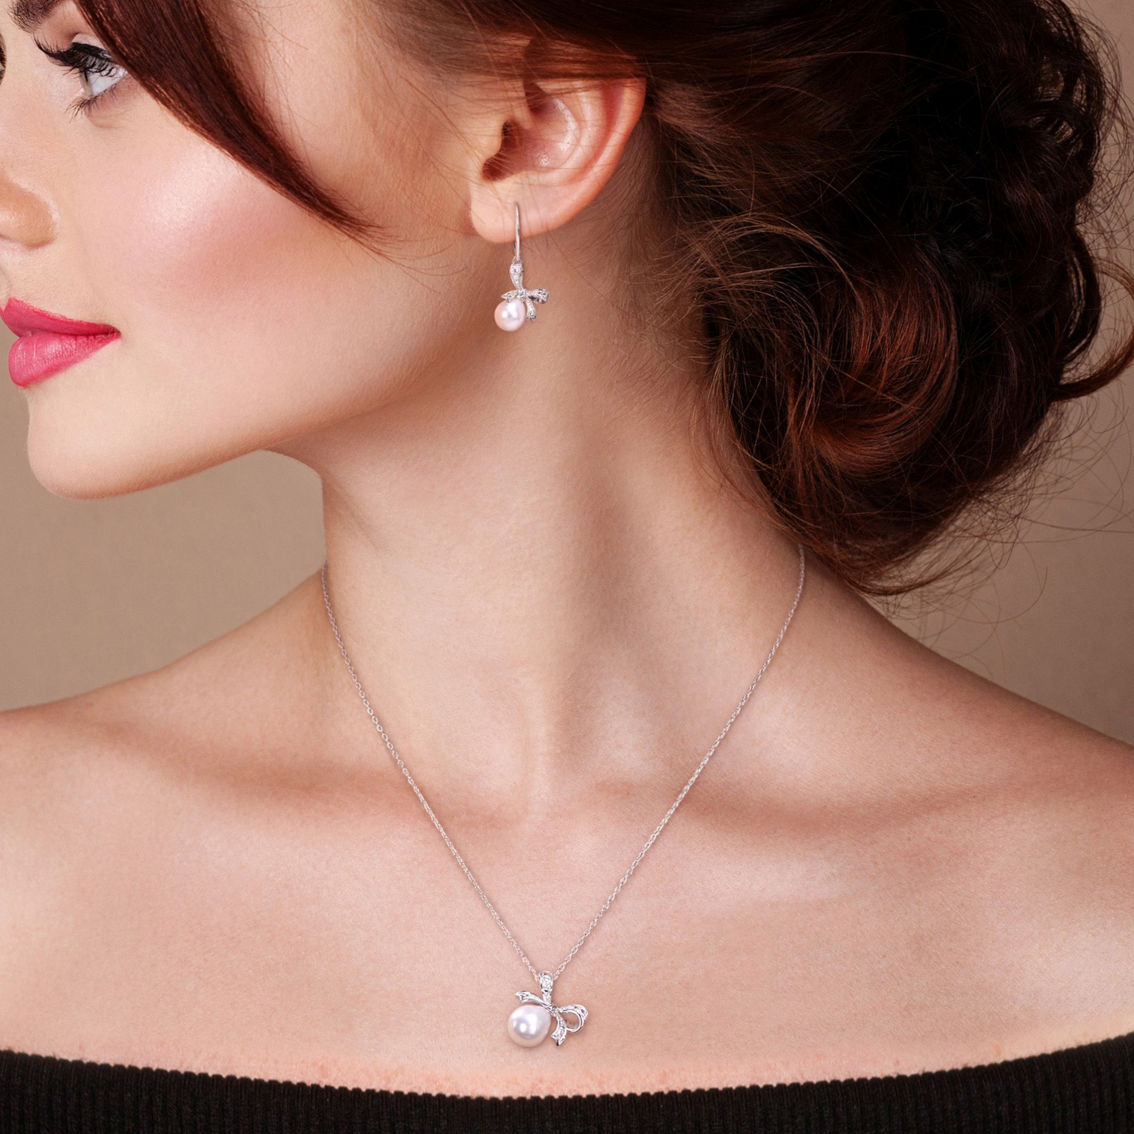 Sofia B. Cultured Freshwater Pearl Diamond Accent Bow Earrings & Necklace 2 pc. Set - Image 2 of 3